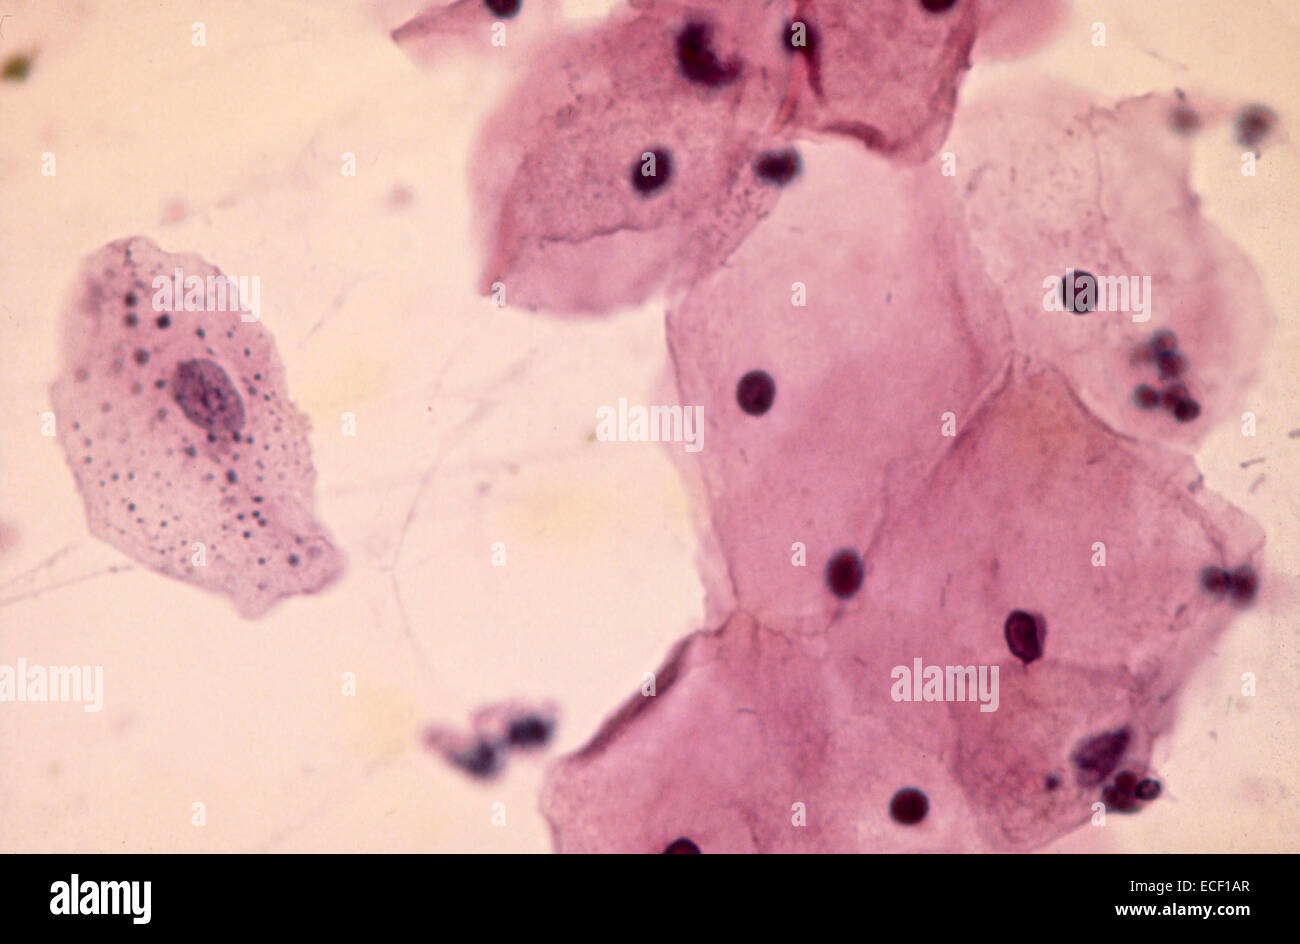 A cytologic smear of vagina with intermediate squamous cells, one of which contains numerous keratohyalin granules (Papanicolaou Stock Photo